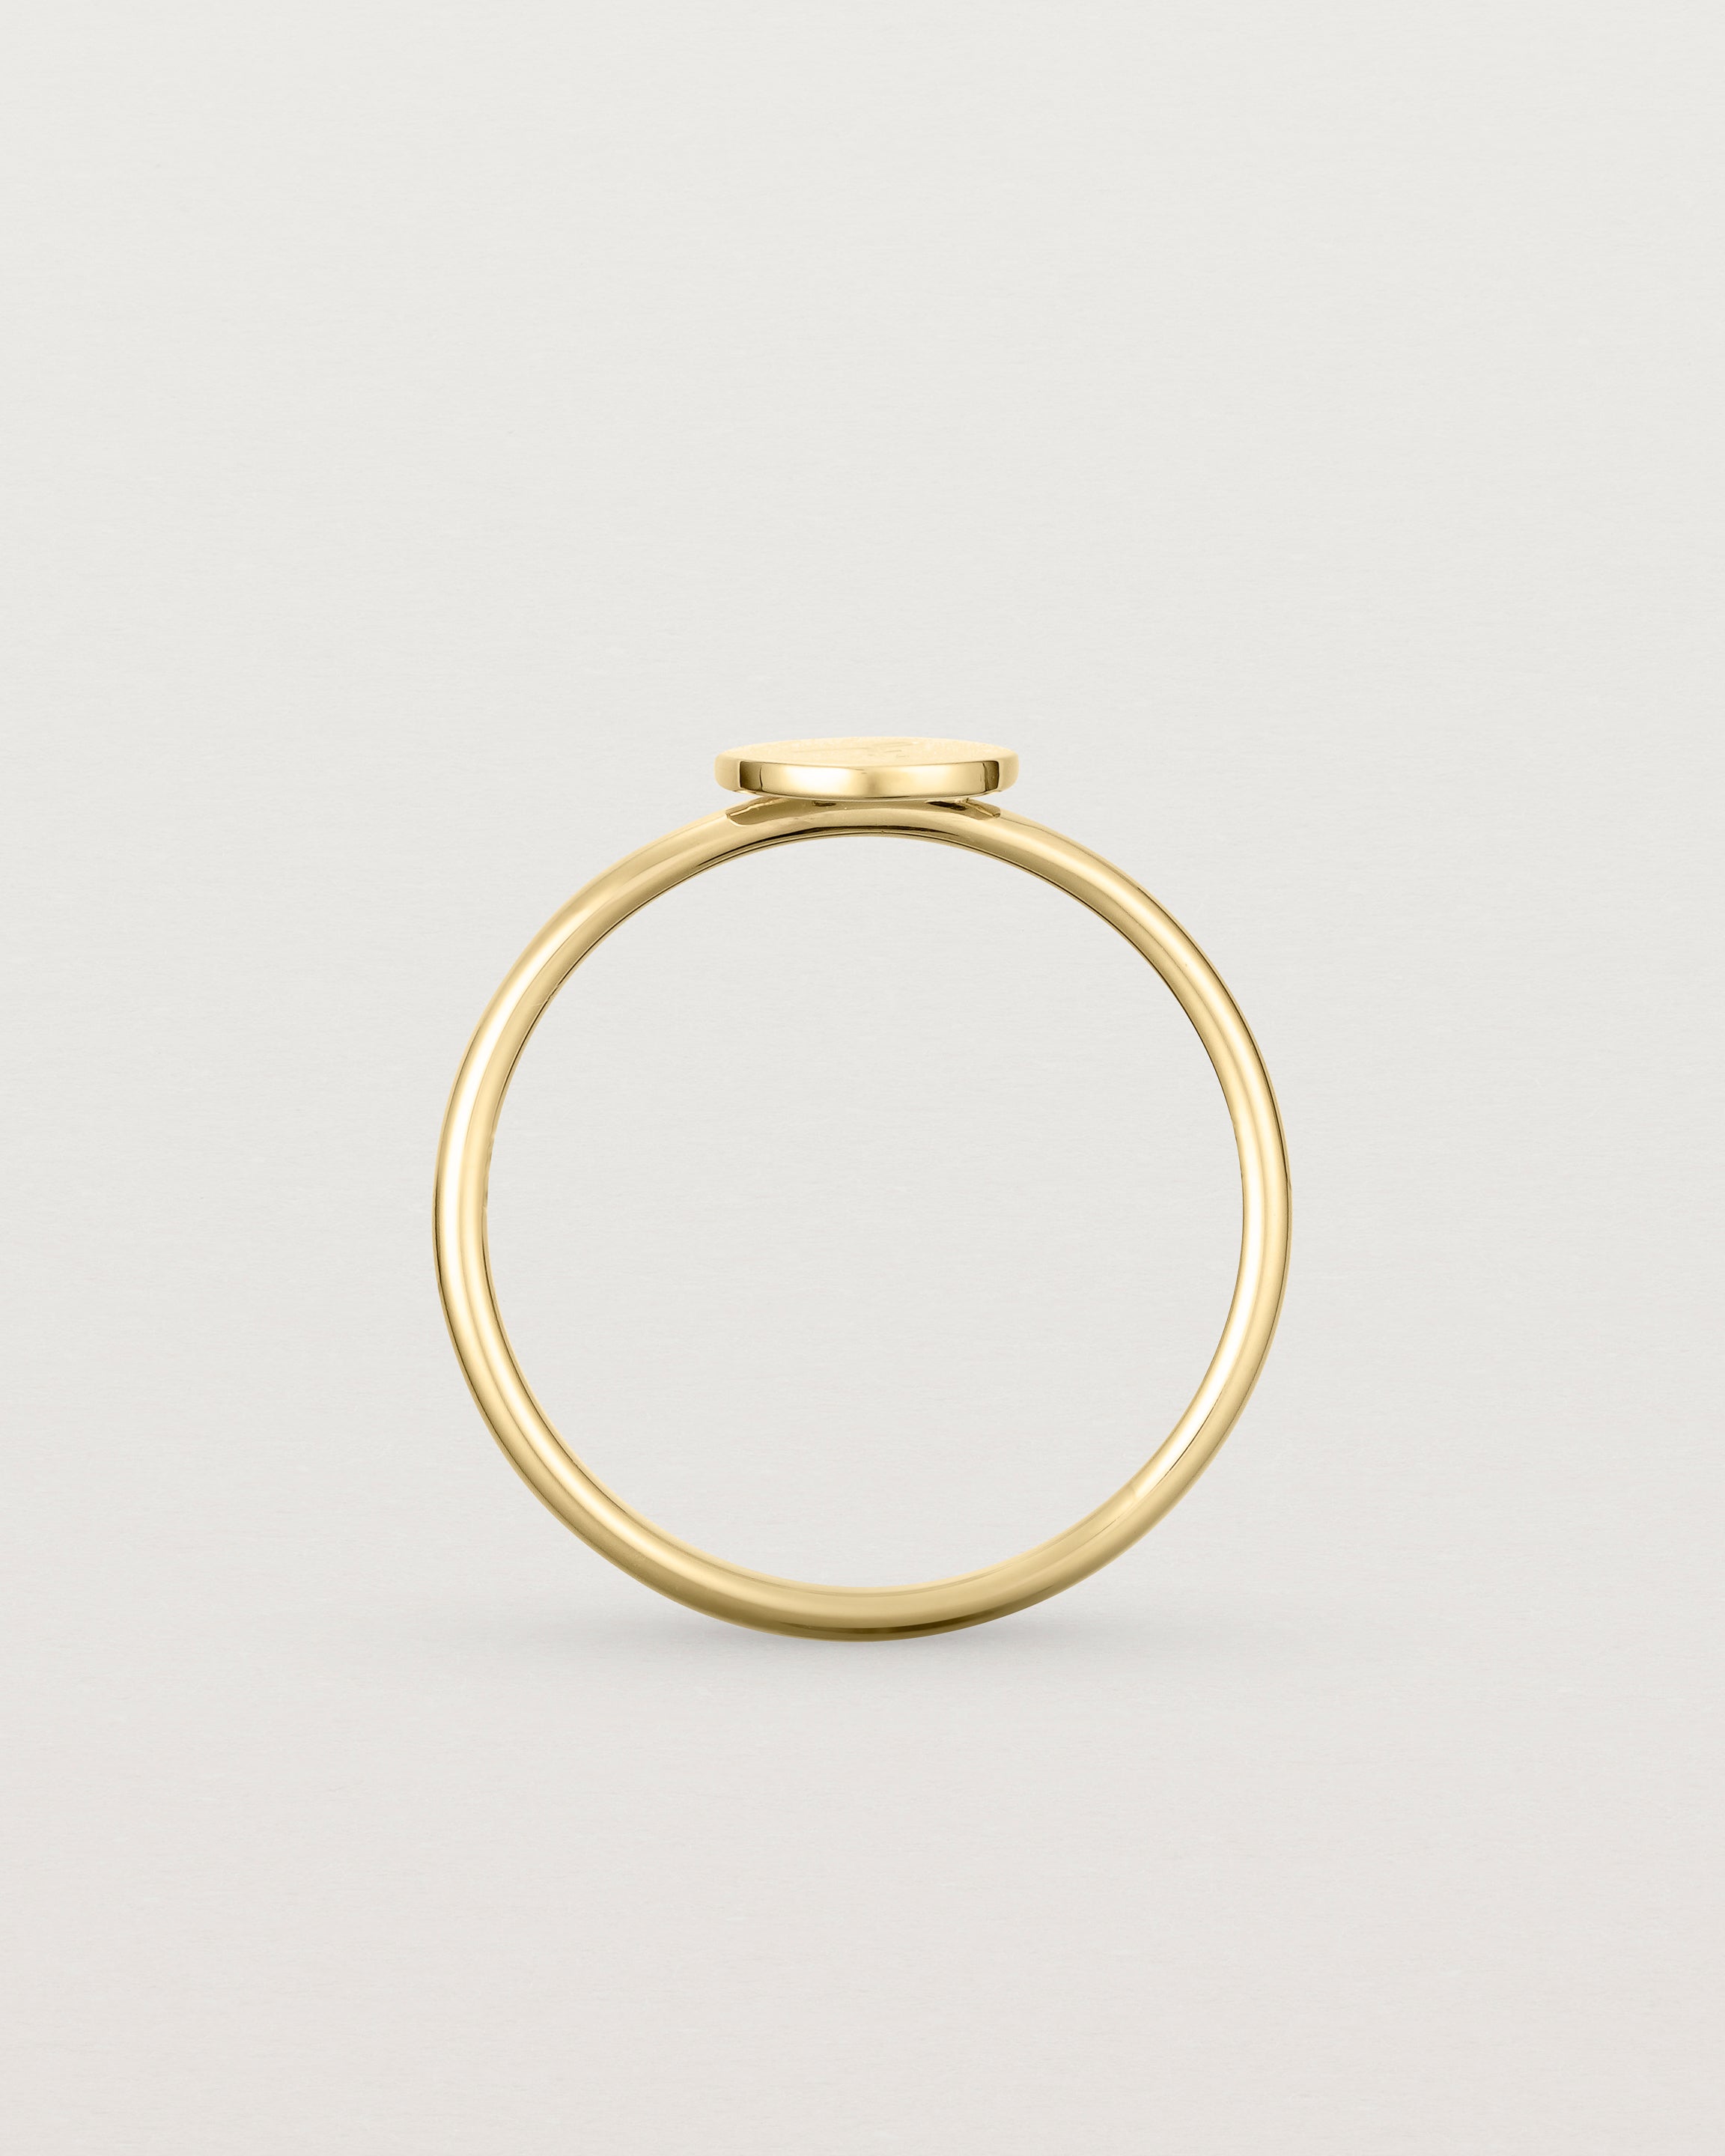 Standing view of a yellow gold ring featuring a disc with the letter j engraved